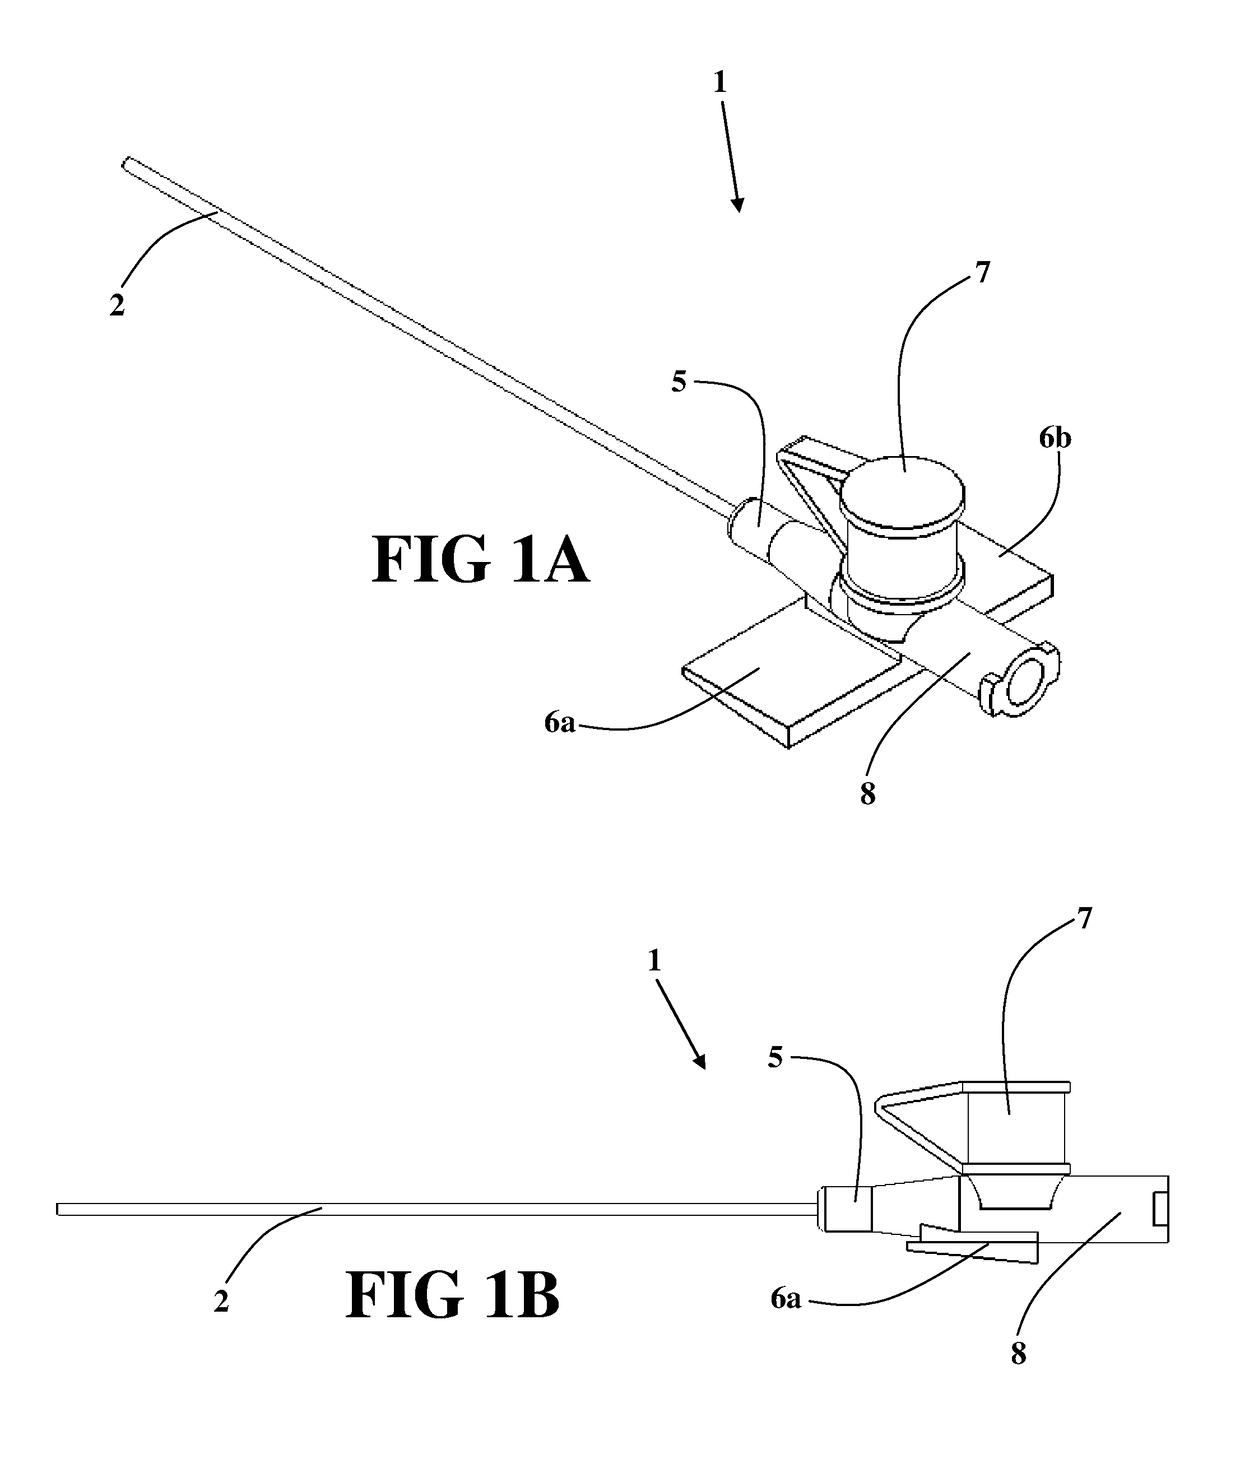 Method and apparatus for inserting a catheter tube